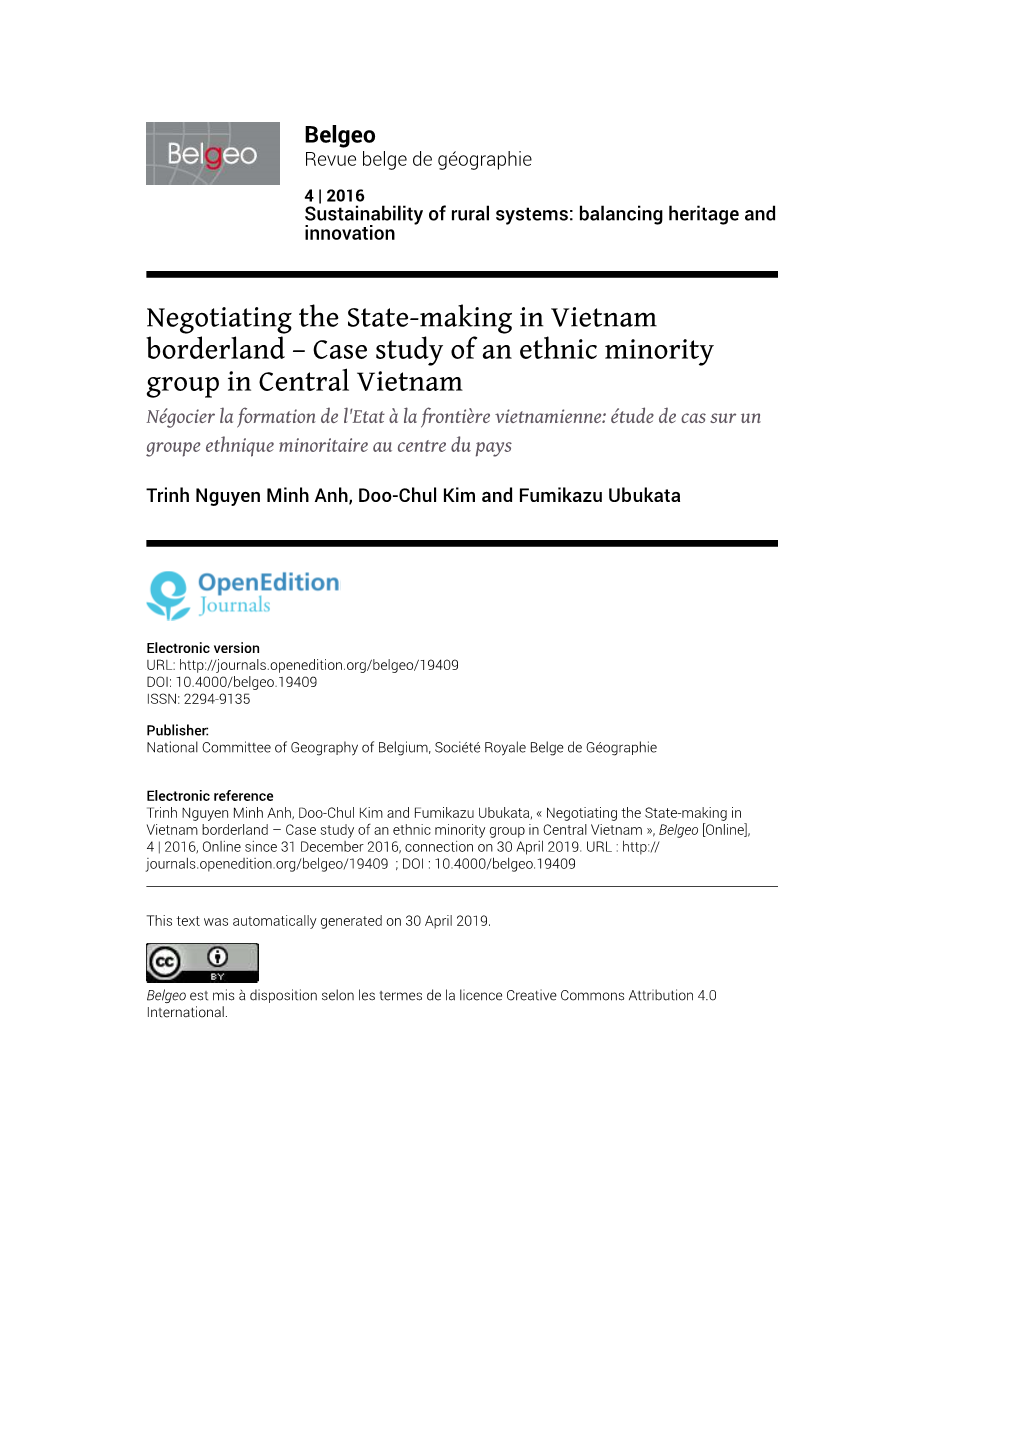 Case Study of an Ethnic Minority Group in Central Vietnam